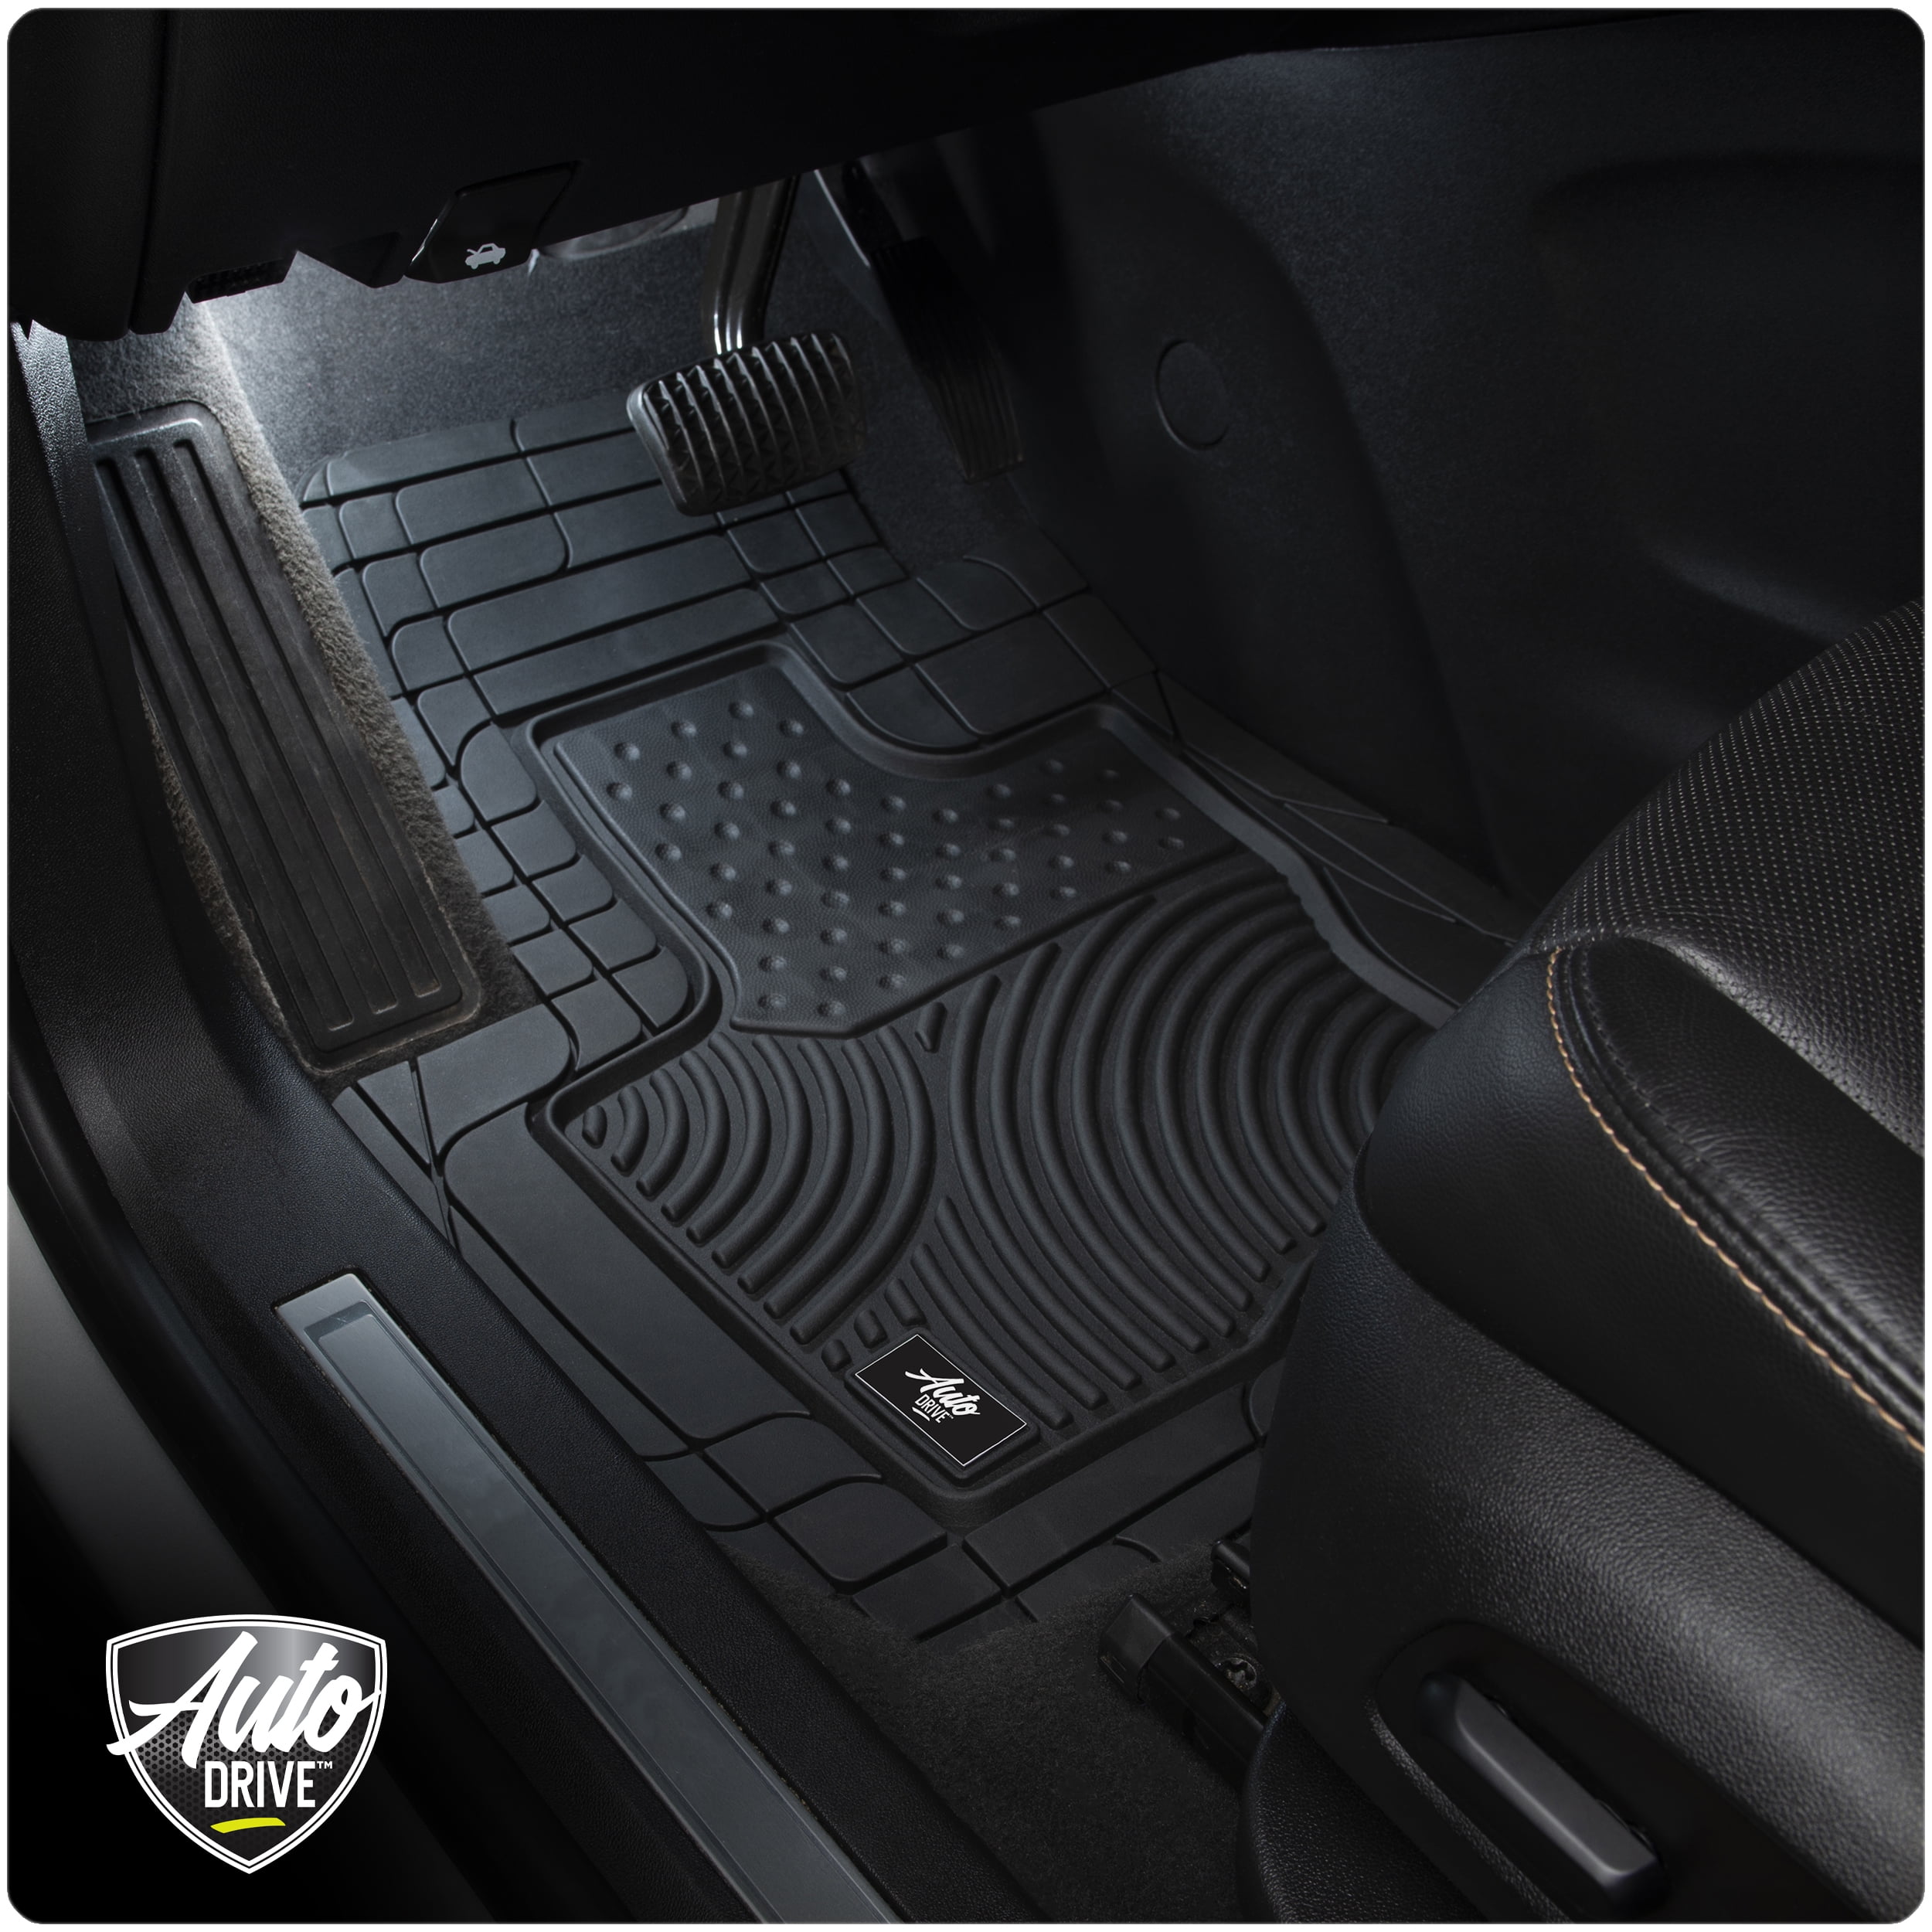 😫 Muddy Shoes in Your Vehicle - Protect with Custom Floor Mats